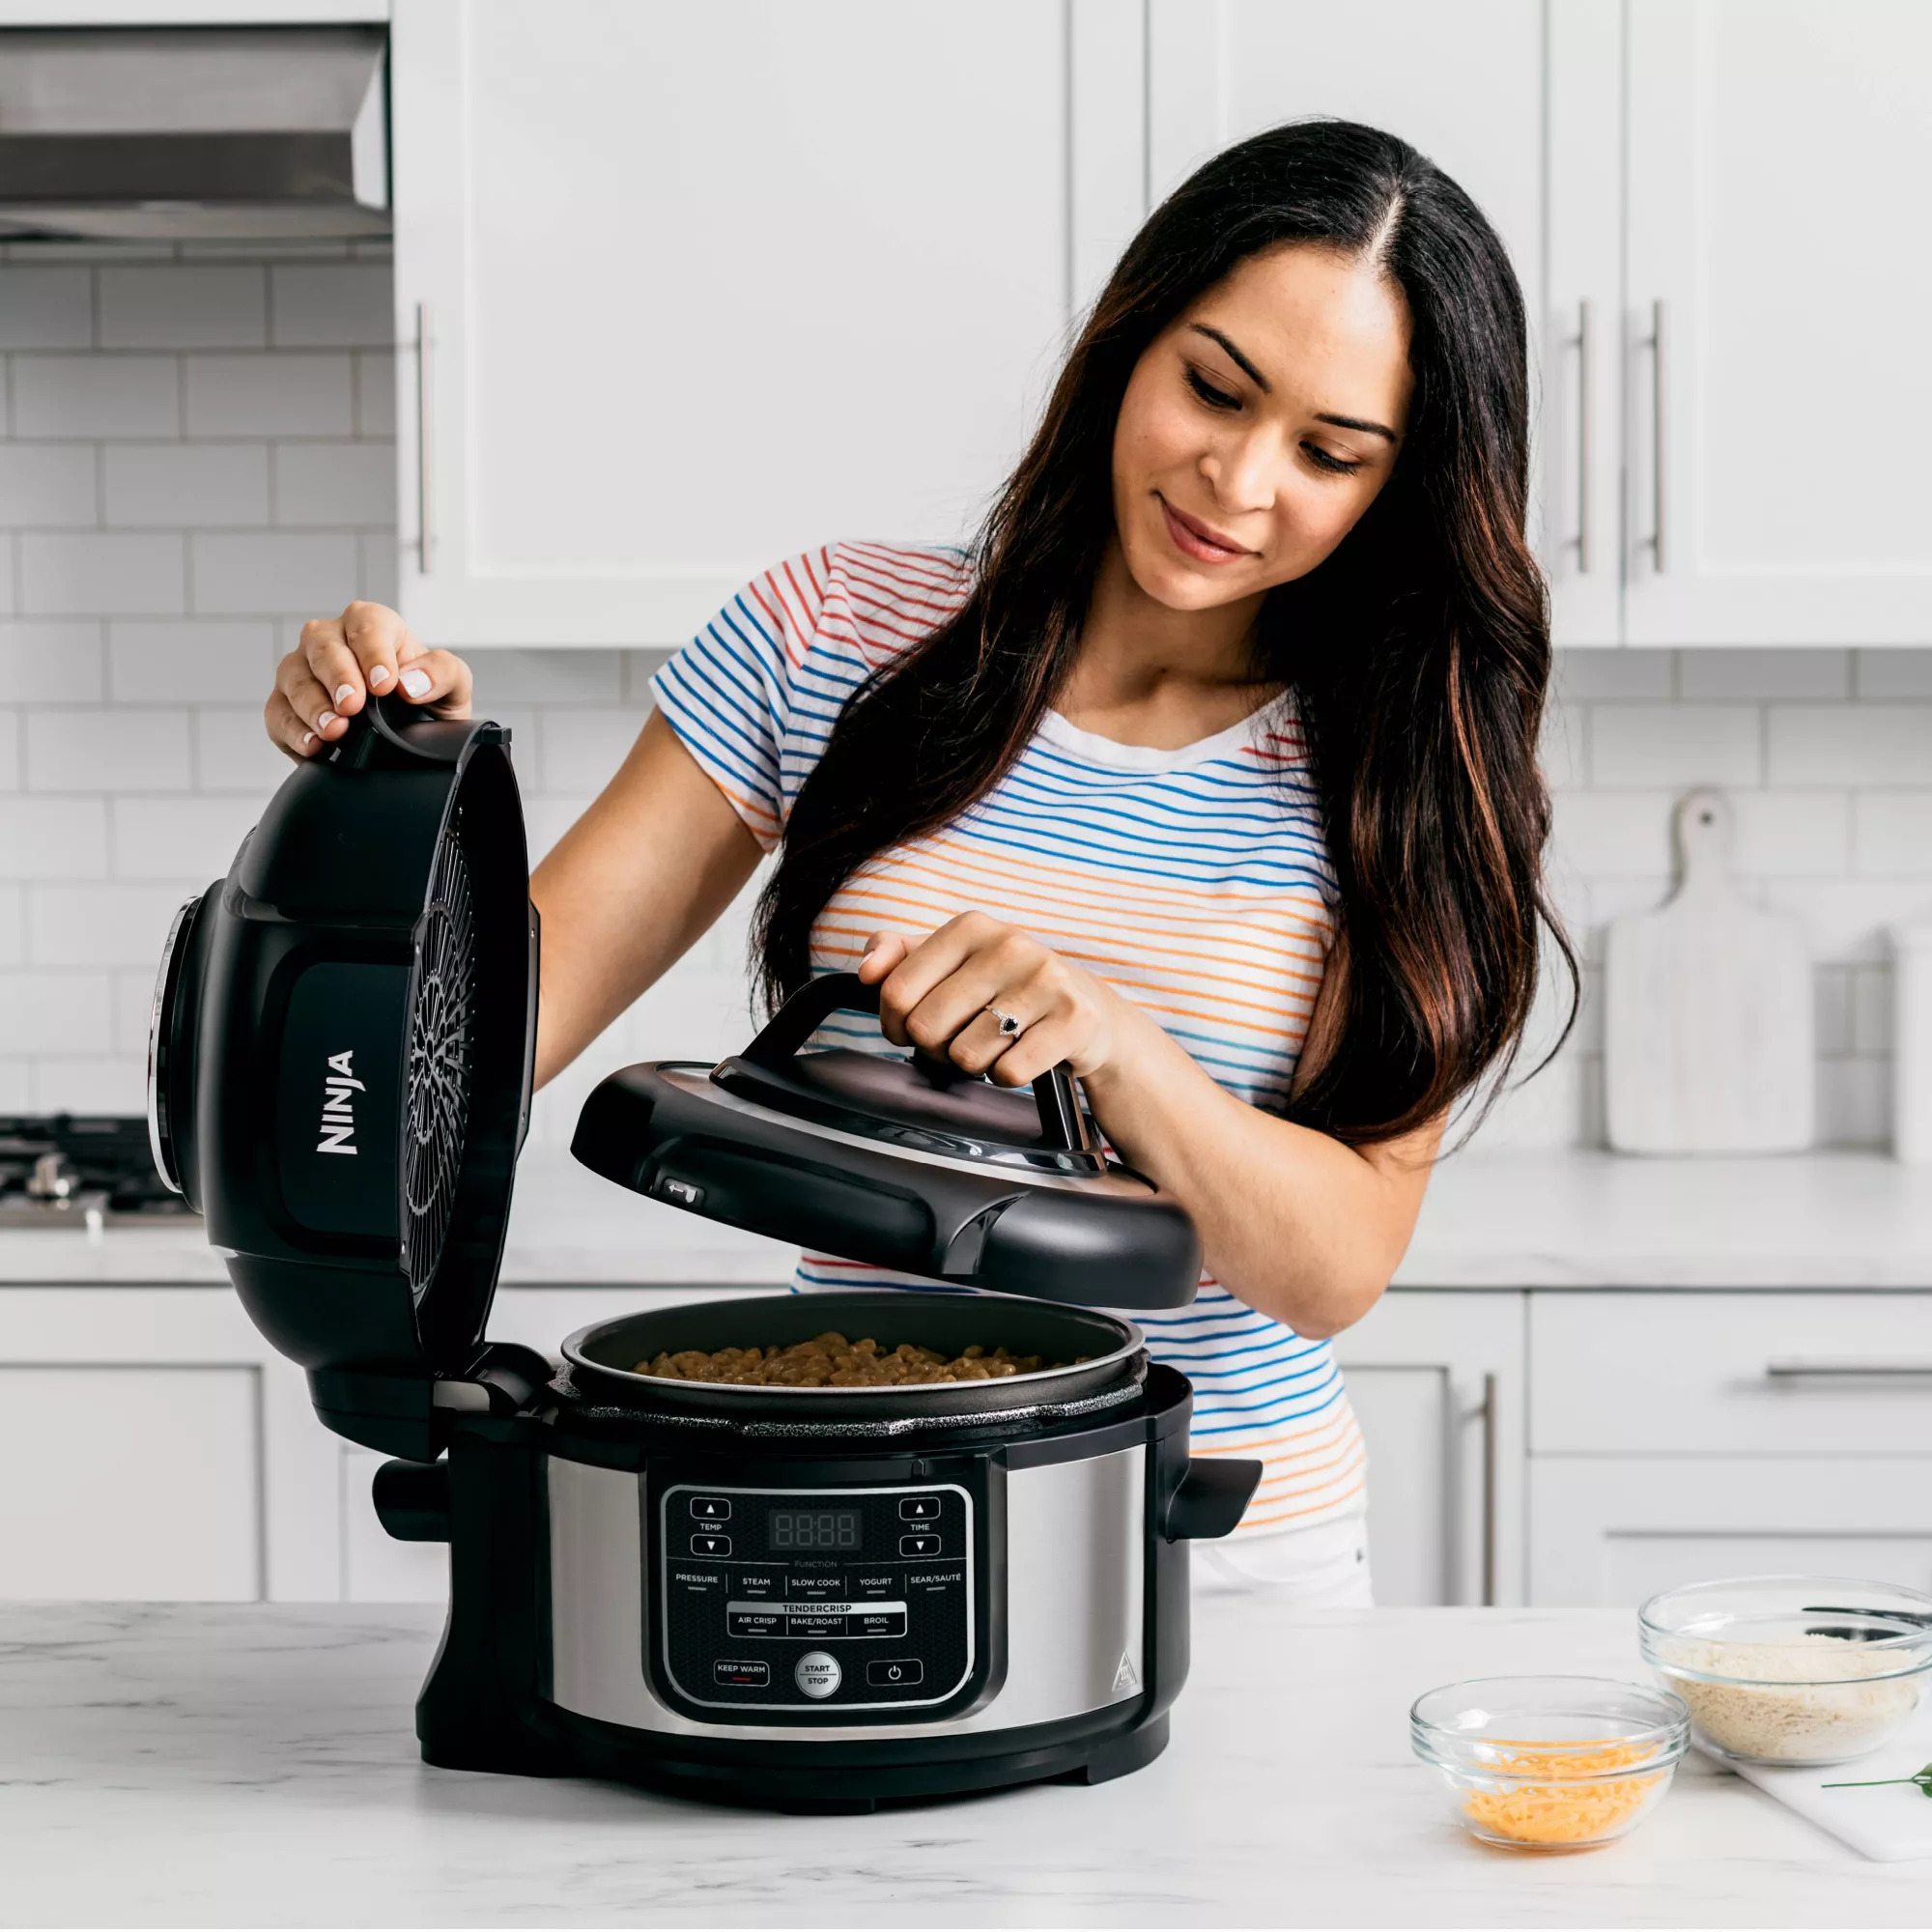 A model using the cooker with the included pressure lid